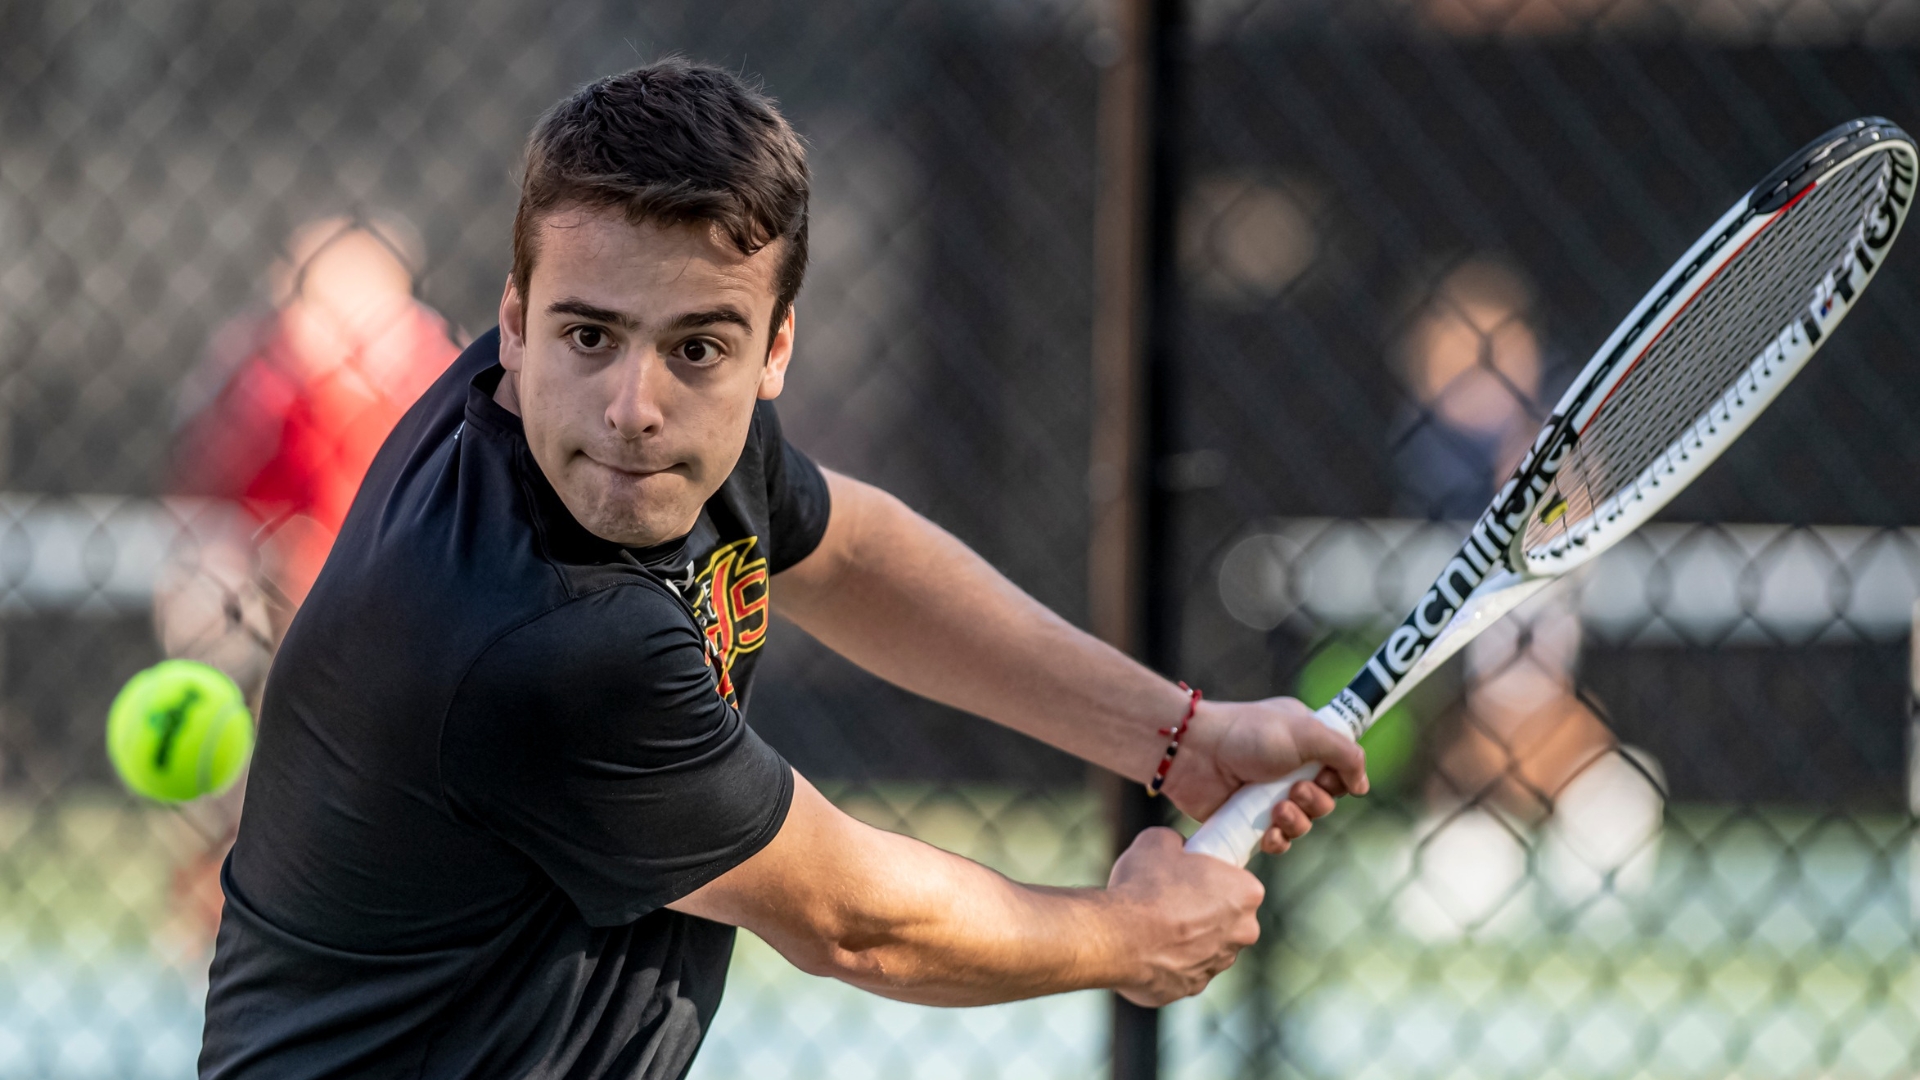 Hernandez Clinched the winning point for the Firebirds at the No.4 position